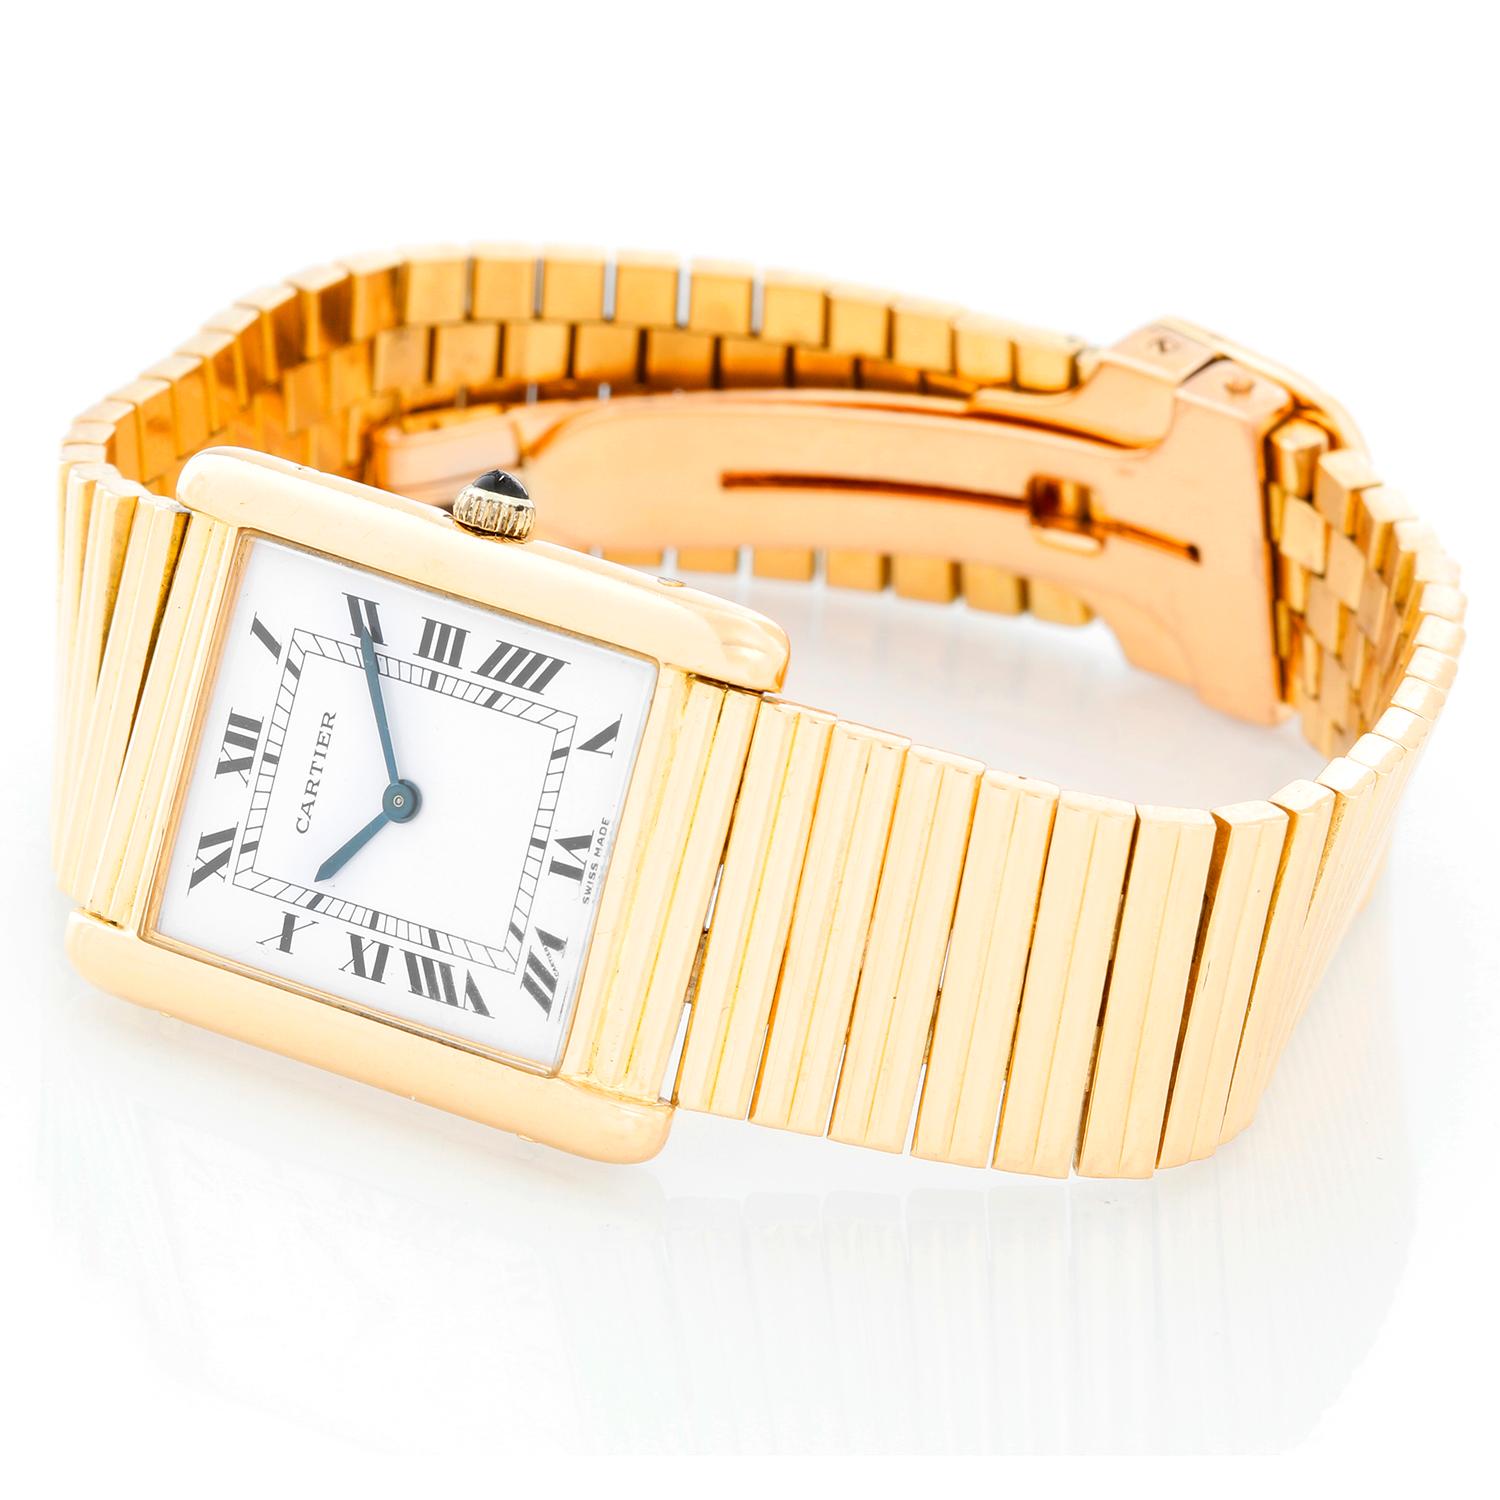 Very Rare Cartier Tank Paris 18K Yellow Gold Watch - Manual. 18K Yellow Gold ( 26 x 34 mm ). Ivory dial with black Roman numerals. 18K Yellow gold integrated bracelet with deployant clasp; can be sized. Can fit up to a 7 inch wrist. Pre-owned with